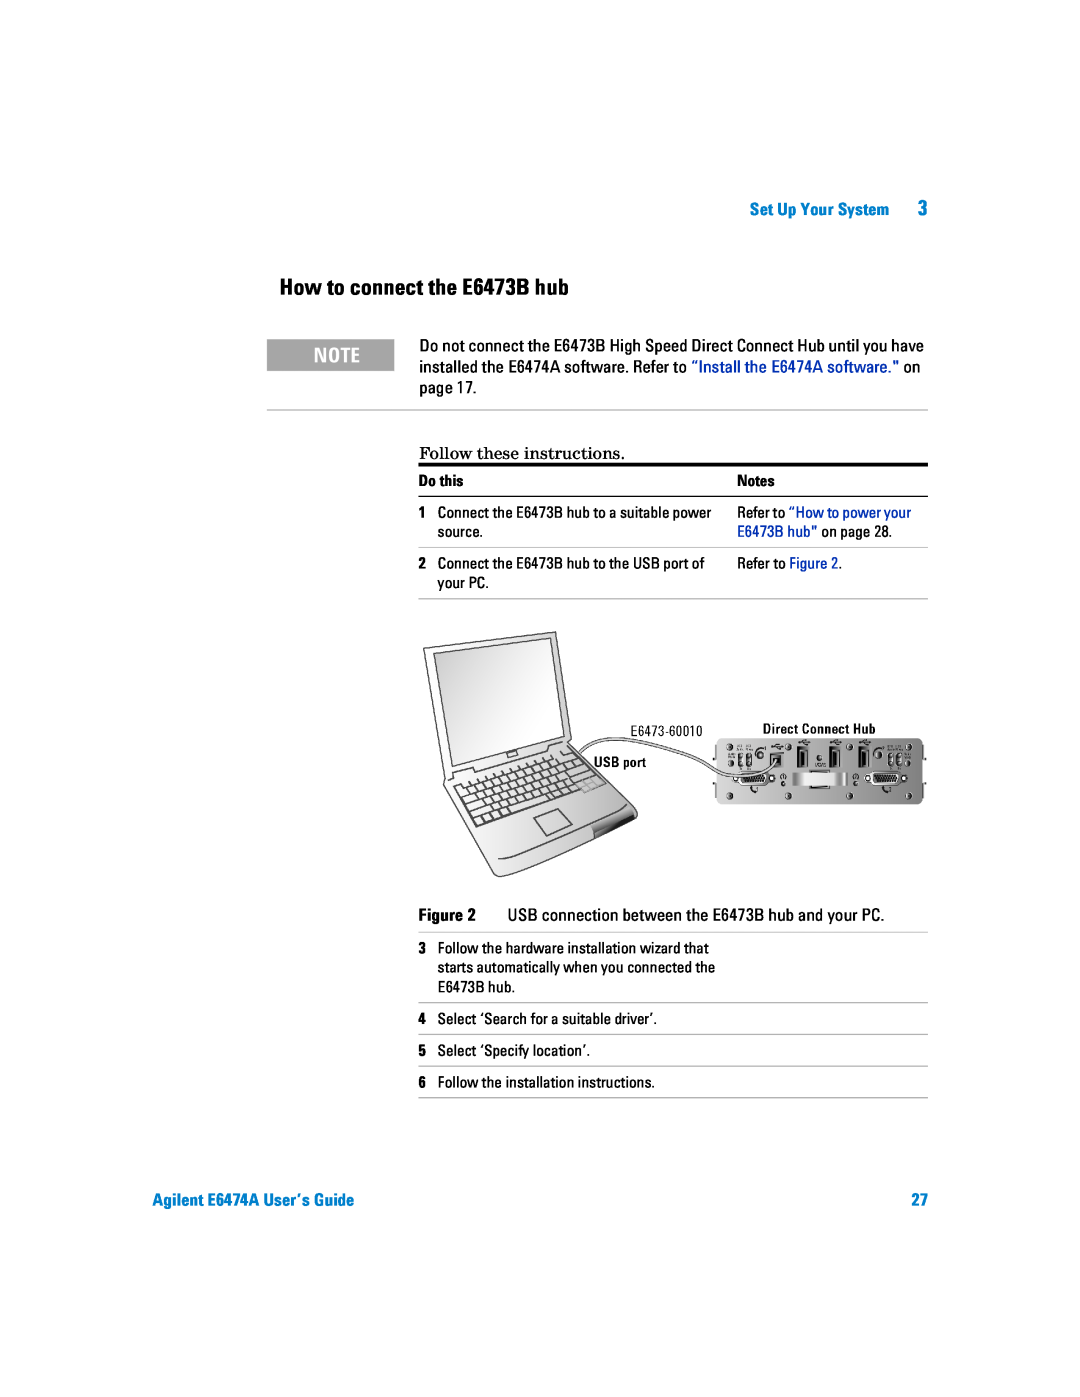 Agilent Technologies manual How to connect the E6473B hub, Set Up Your System, Agilent E6474A User’s Guide 